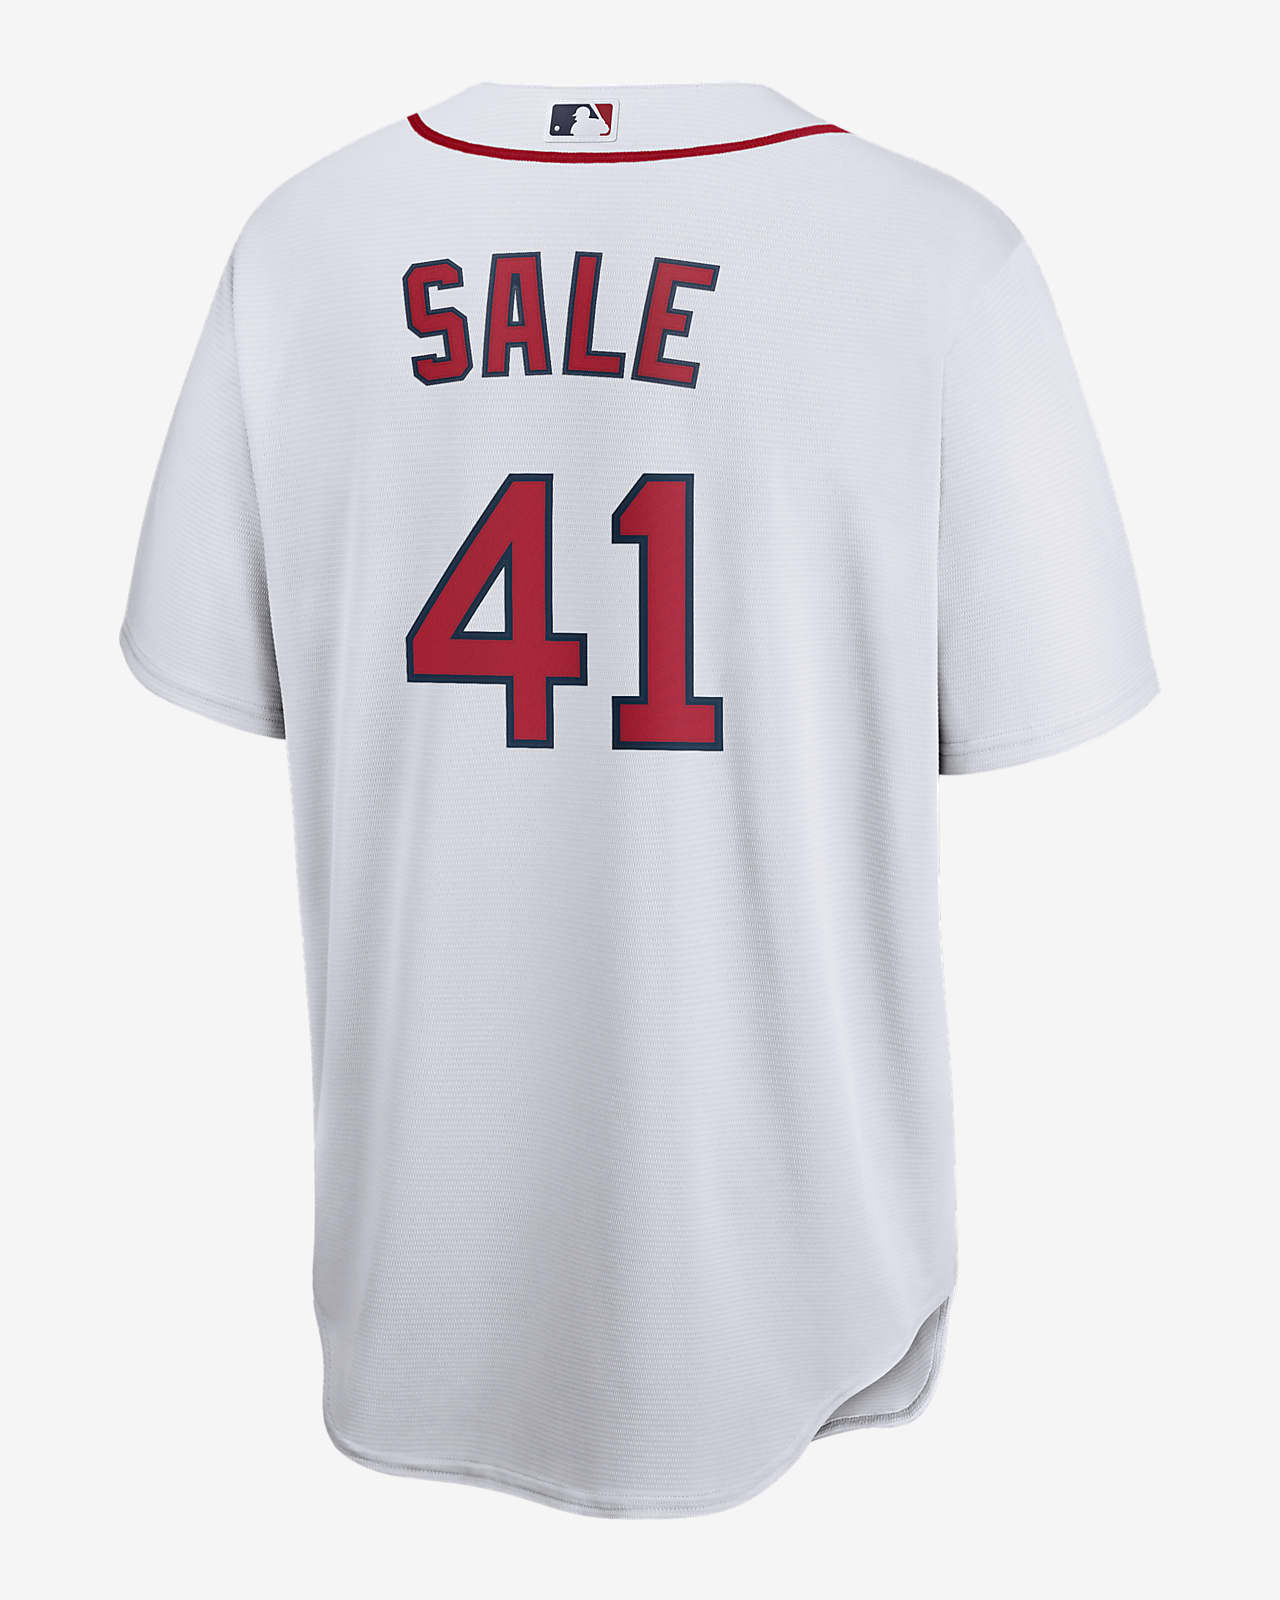 men's red sox jersey